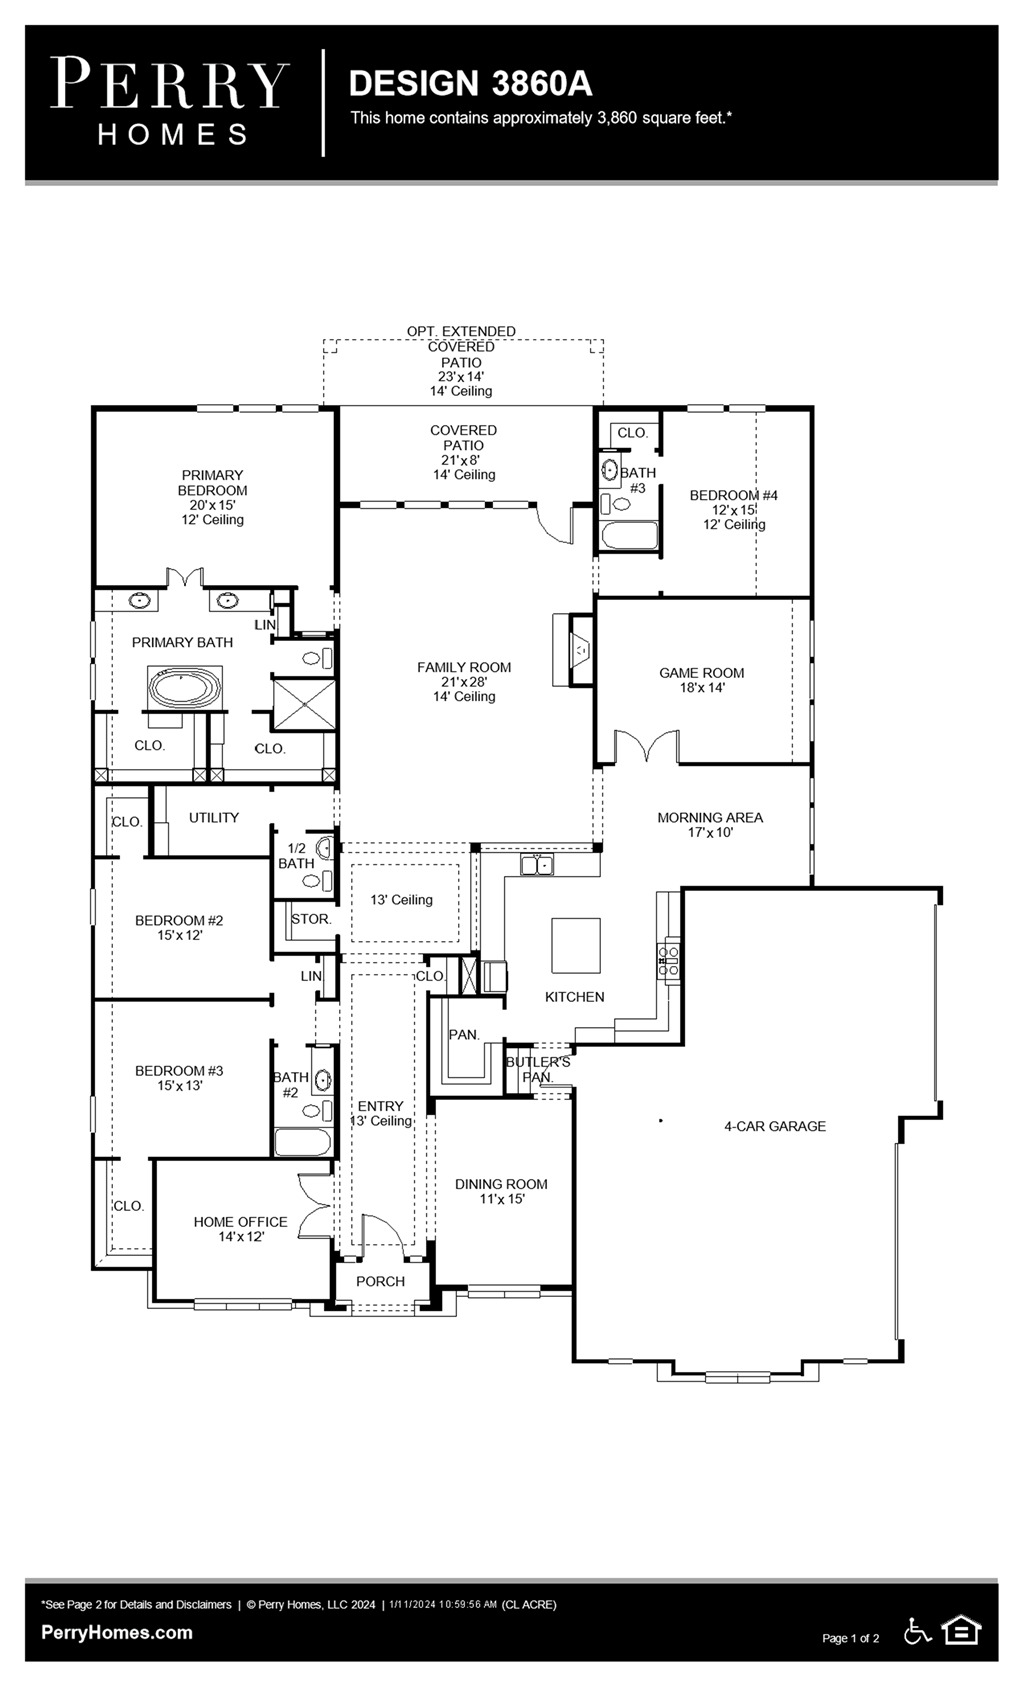 Floor Plan for 3860A